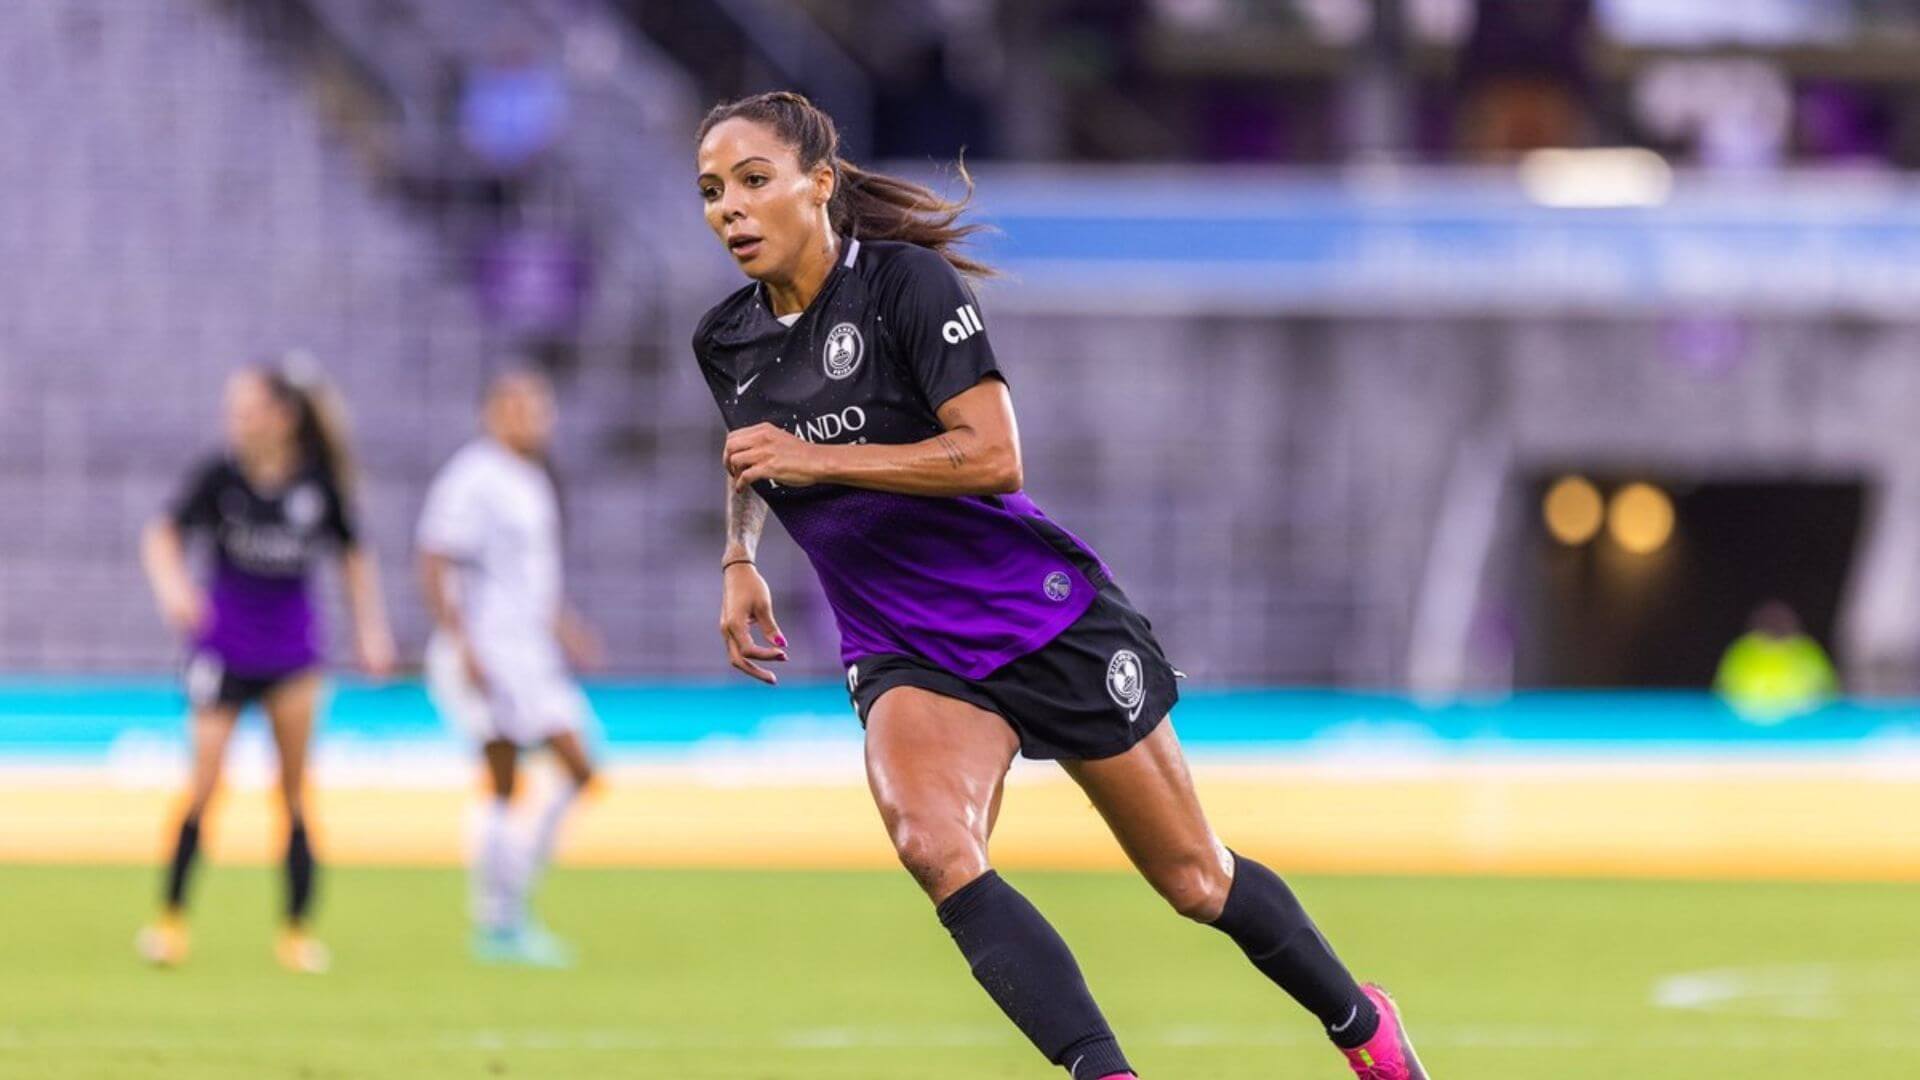 Sydney Leroux is in excellent form this season.